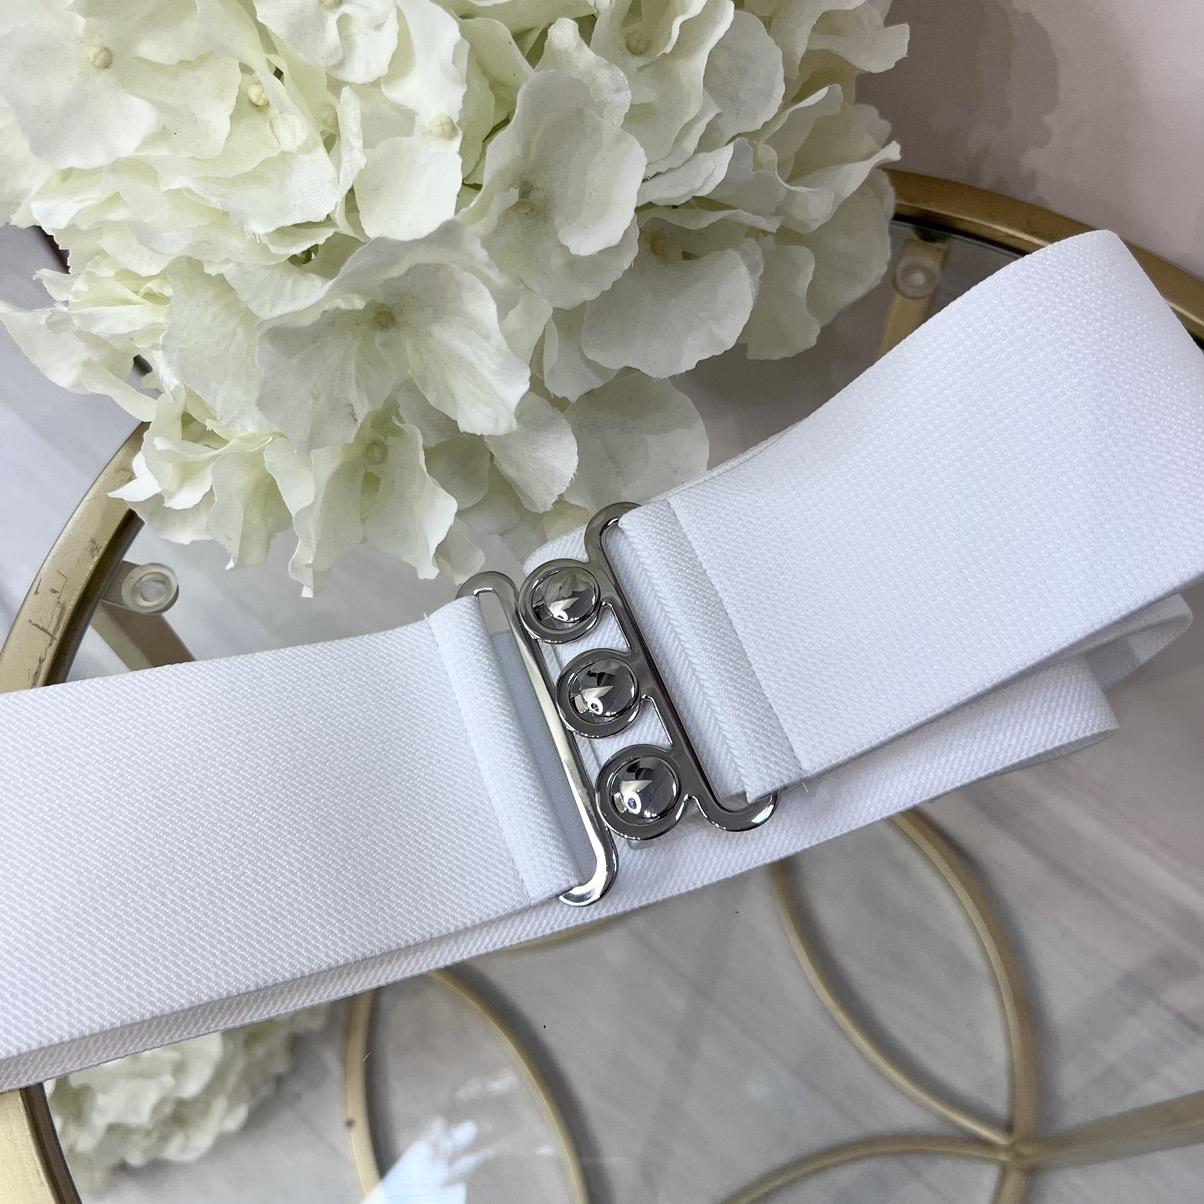 Bree: Retro stretchy belt with silver buckle. One size 18-24